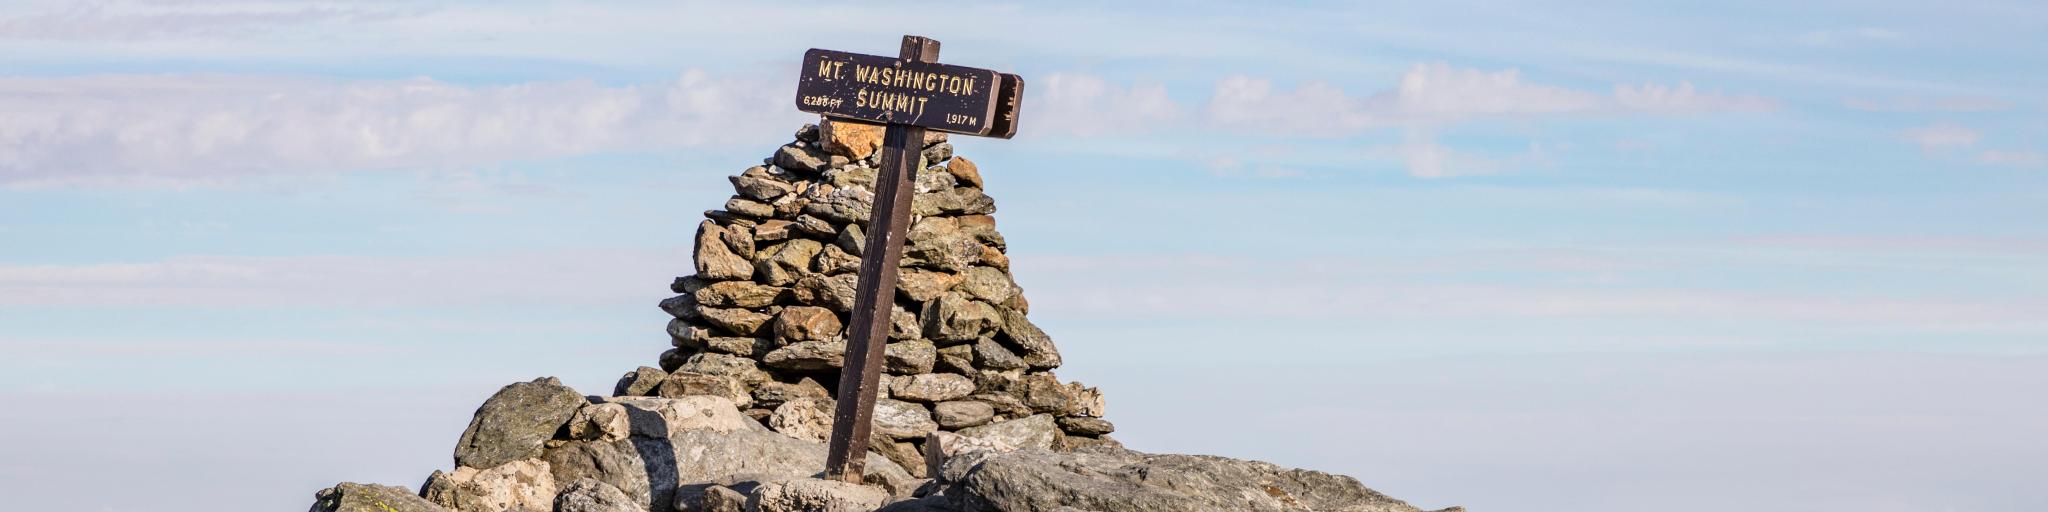 Wooden sign at the Mount Washington Summit, NH, on a clear day